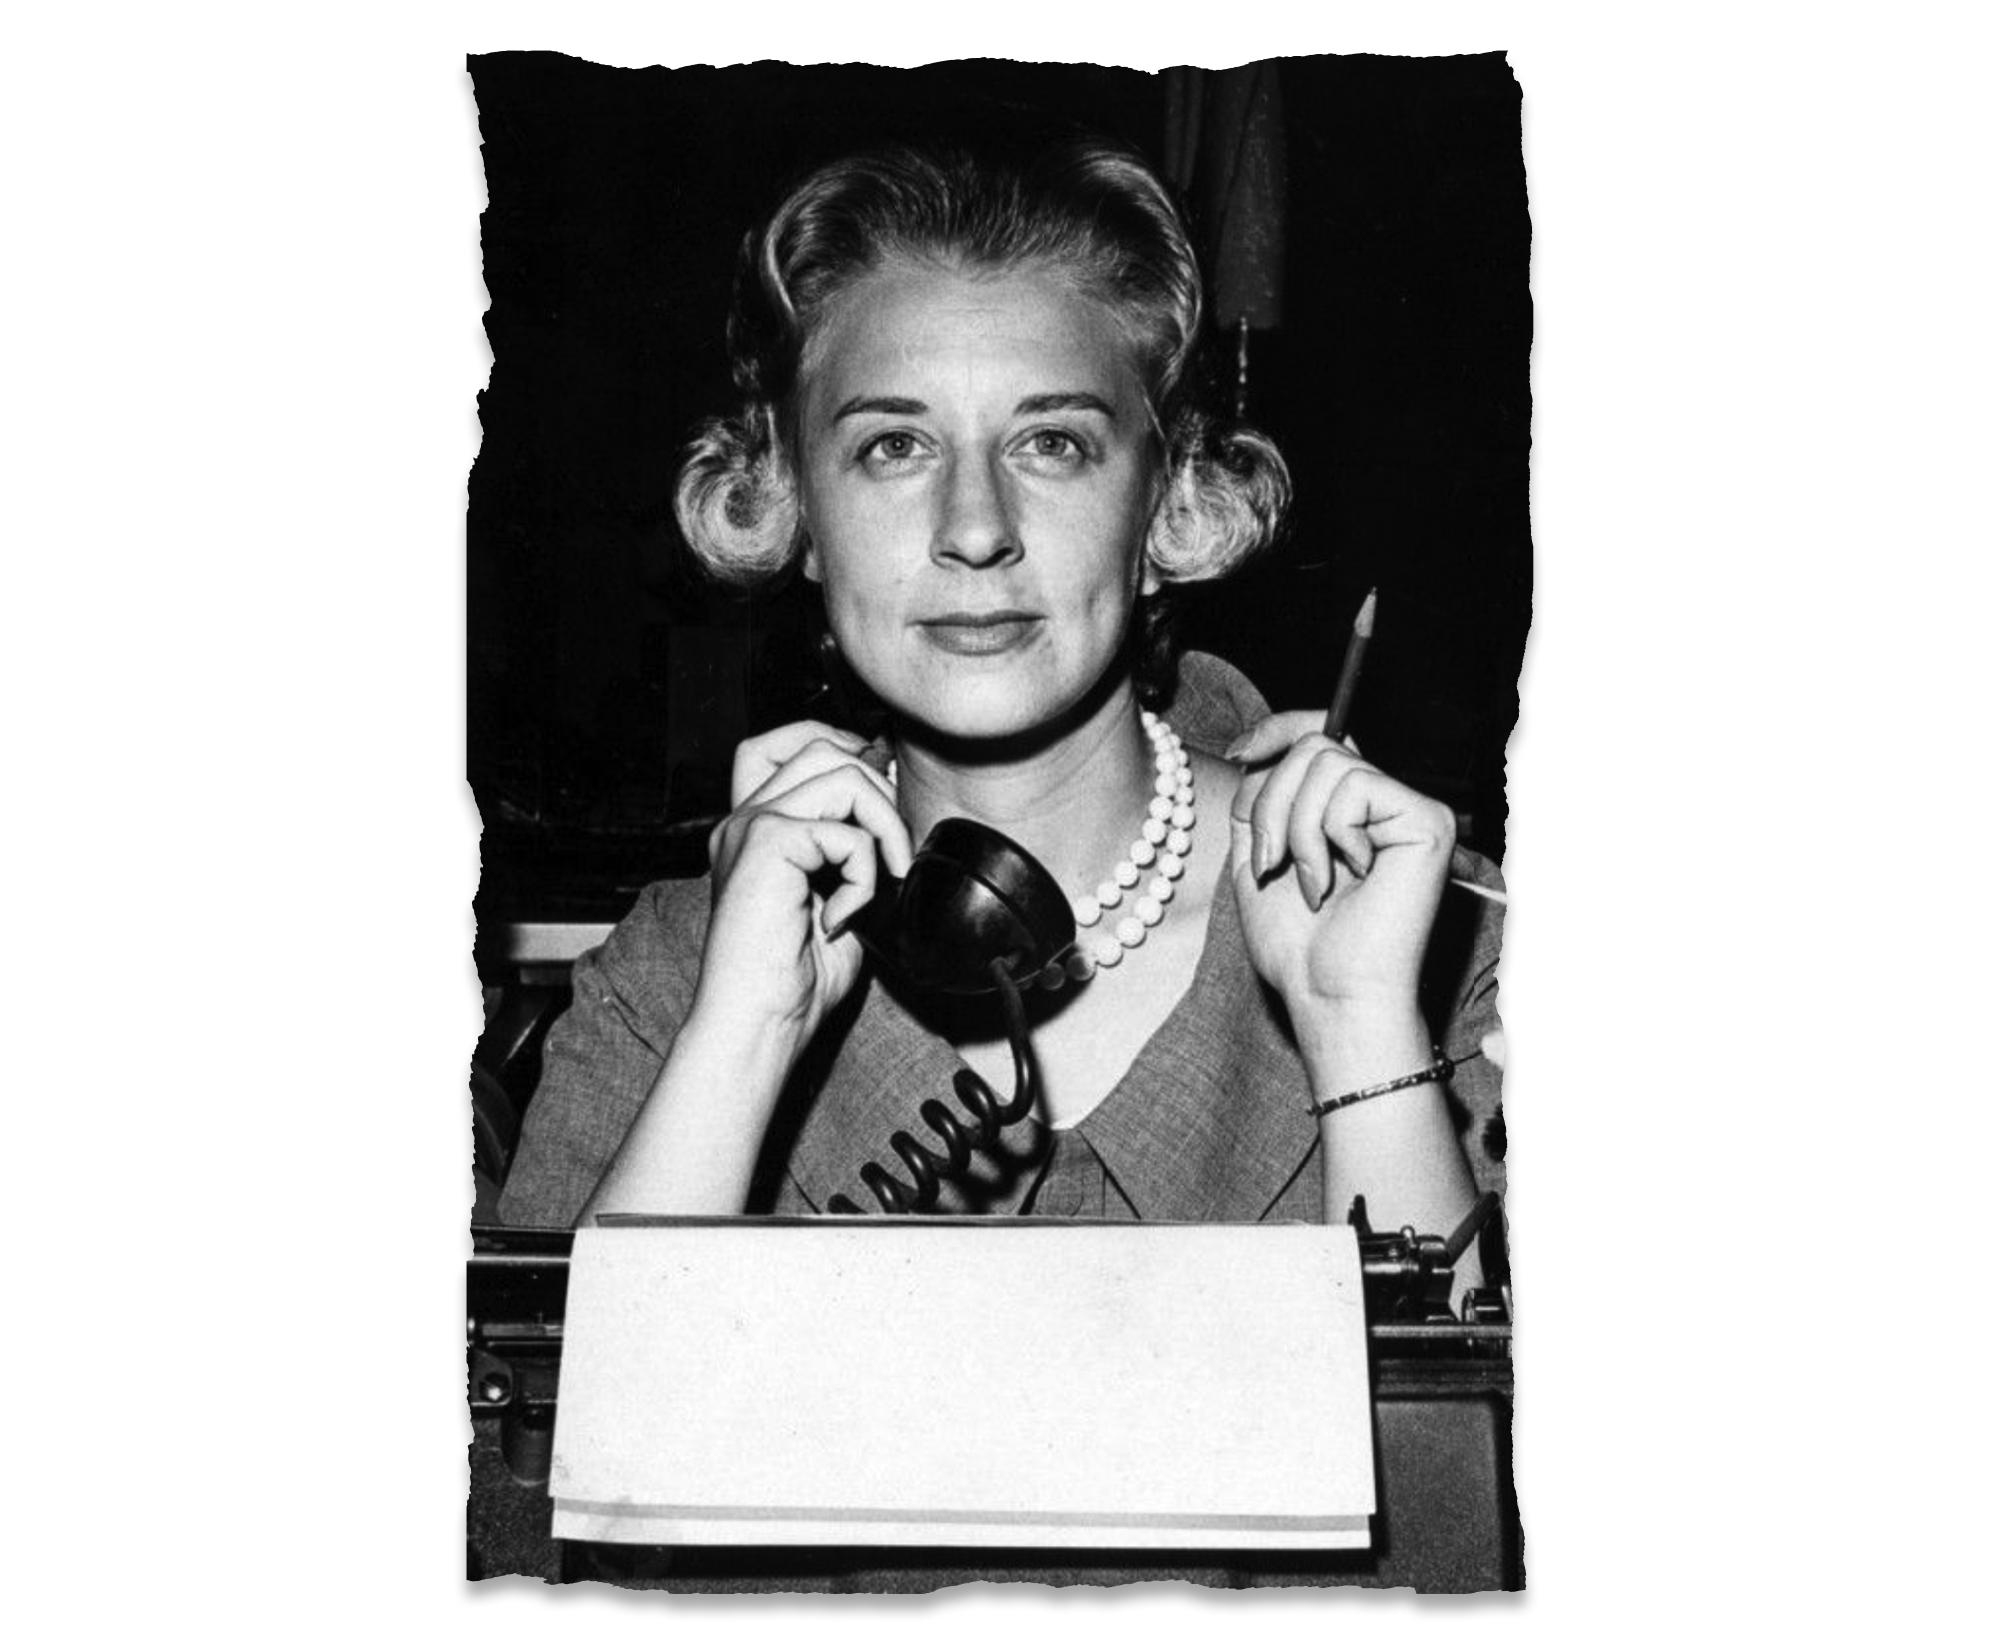 Doris Klein with light hair curled up, wearing a pearl necklace, holding a phone receiver in one hand and pencil in the other